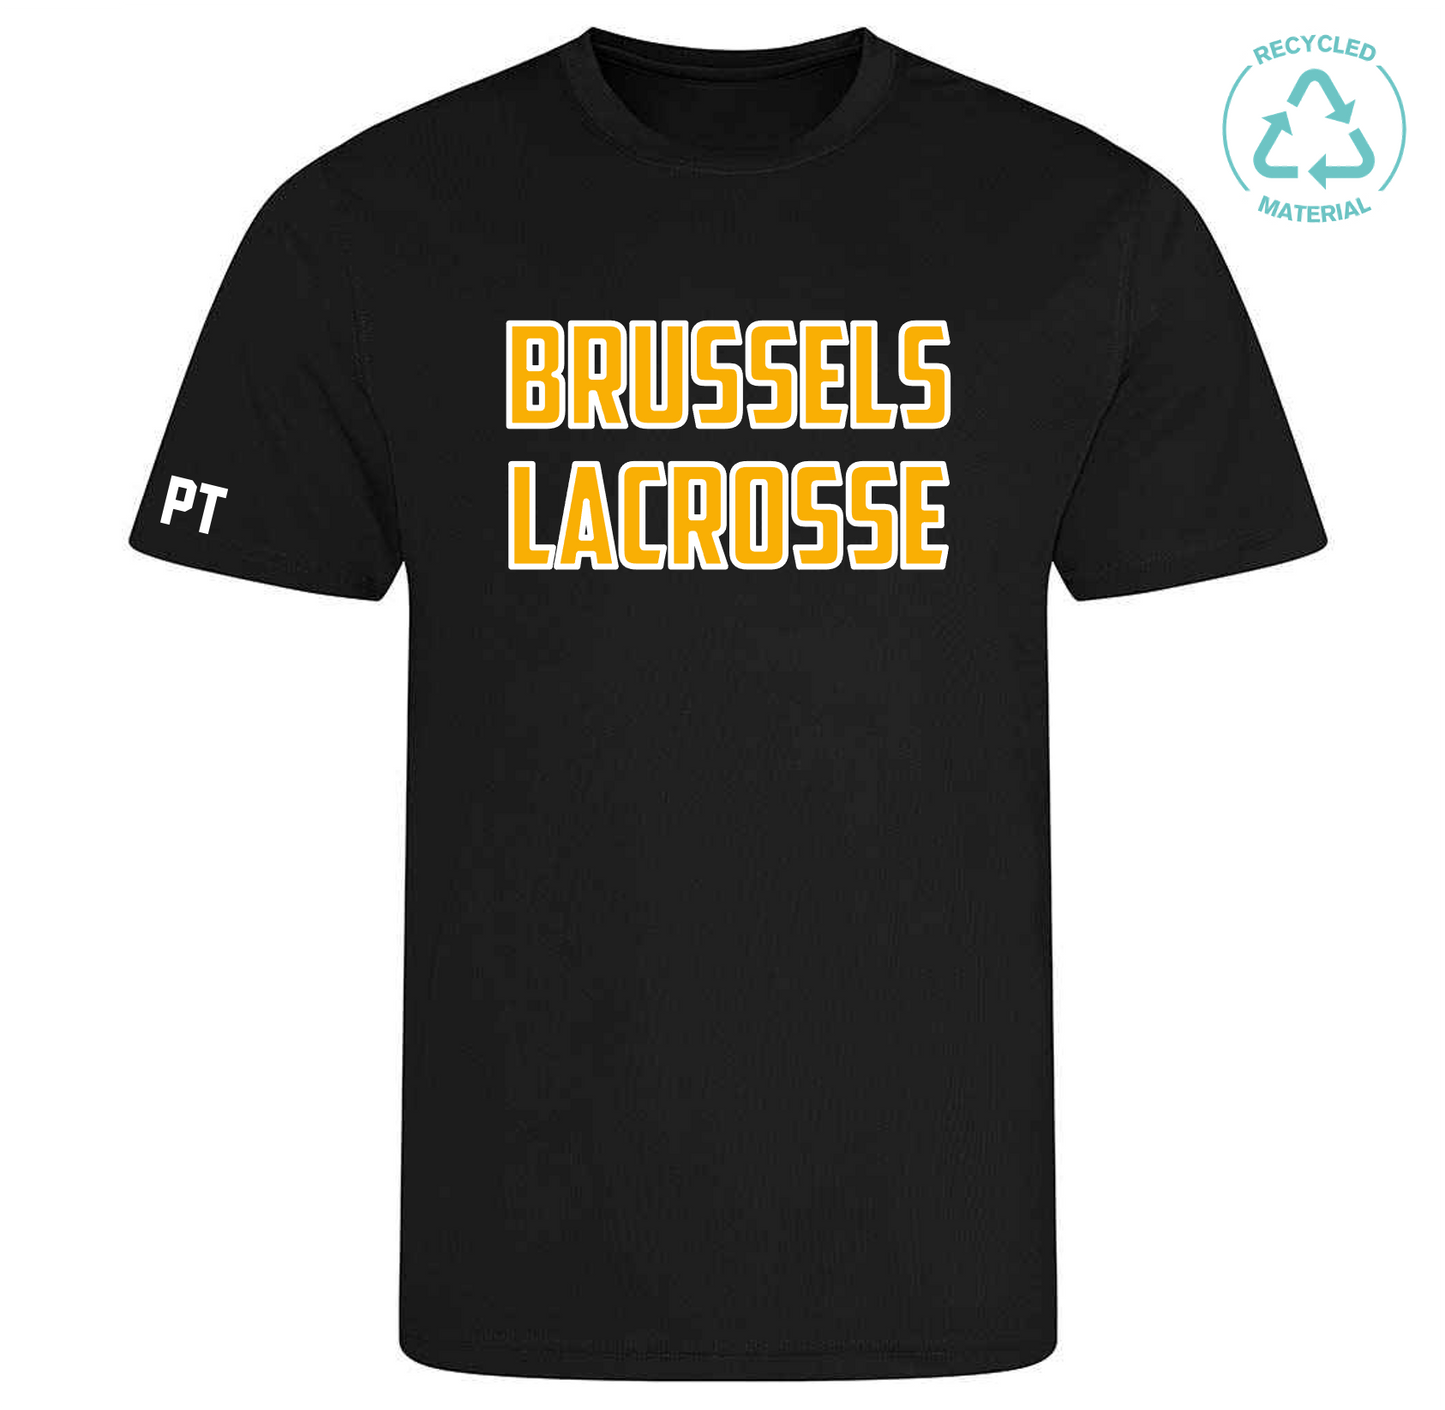 Brussels LC Recycled Tech Tee